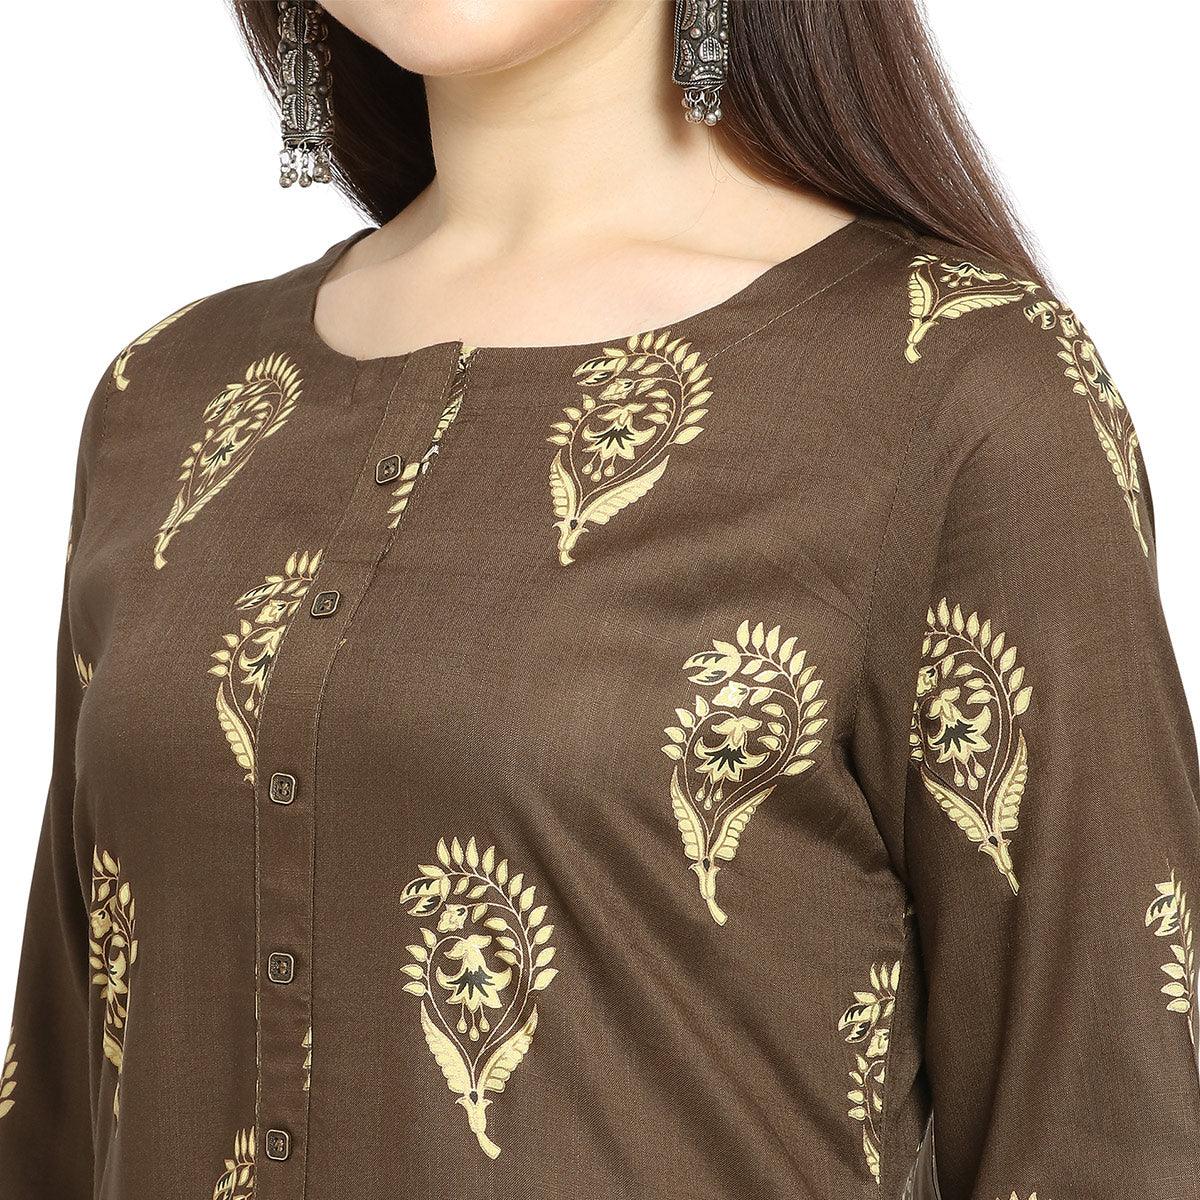 Glowing Brown Colored Casual Wear Printed Cotton Kurti-Palazzo Suit - Peachmode